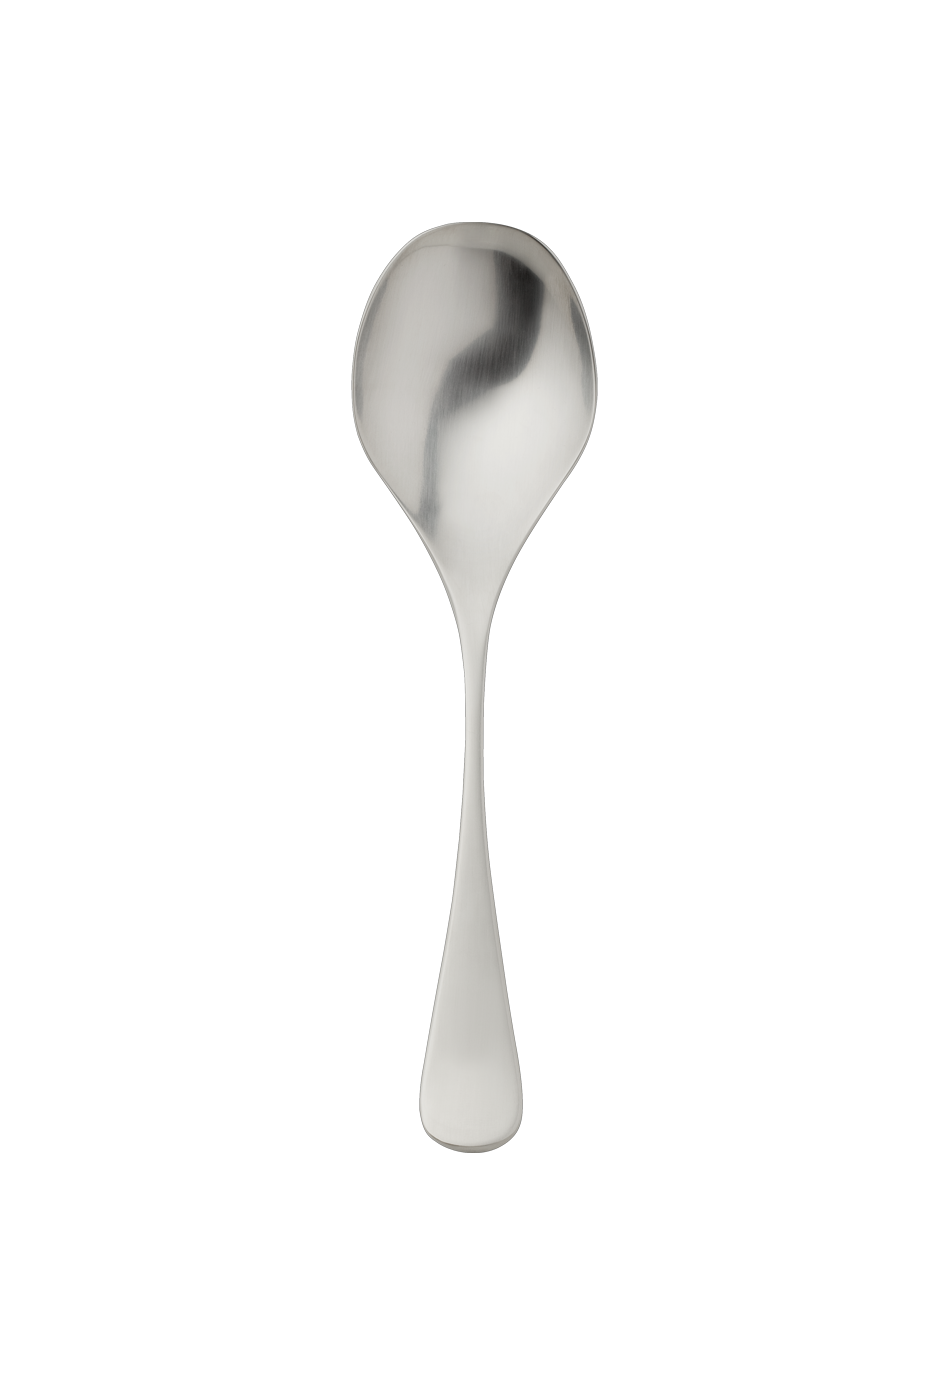 Scandia Compote/Salad Serving Spoon, large (18/8 stainless steel)